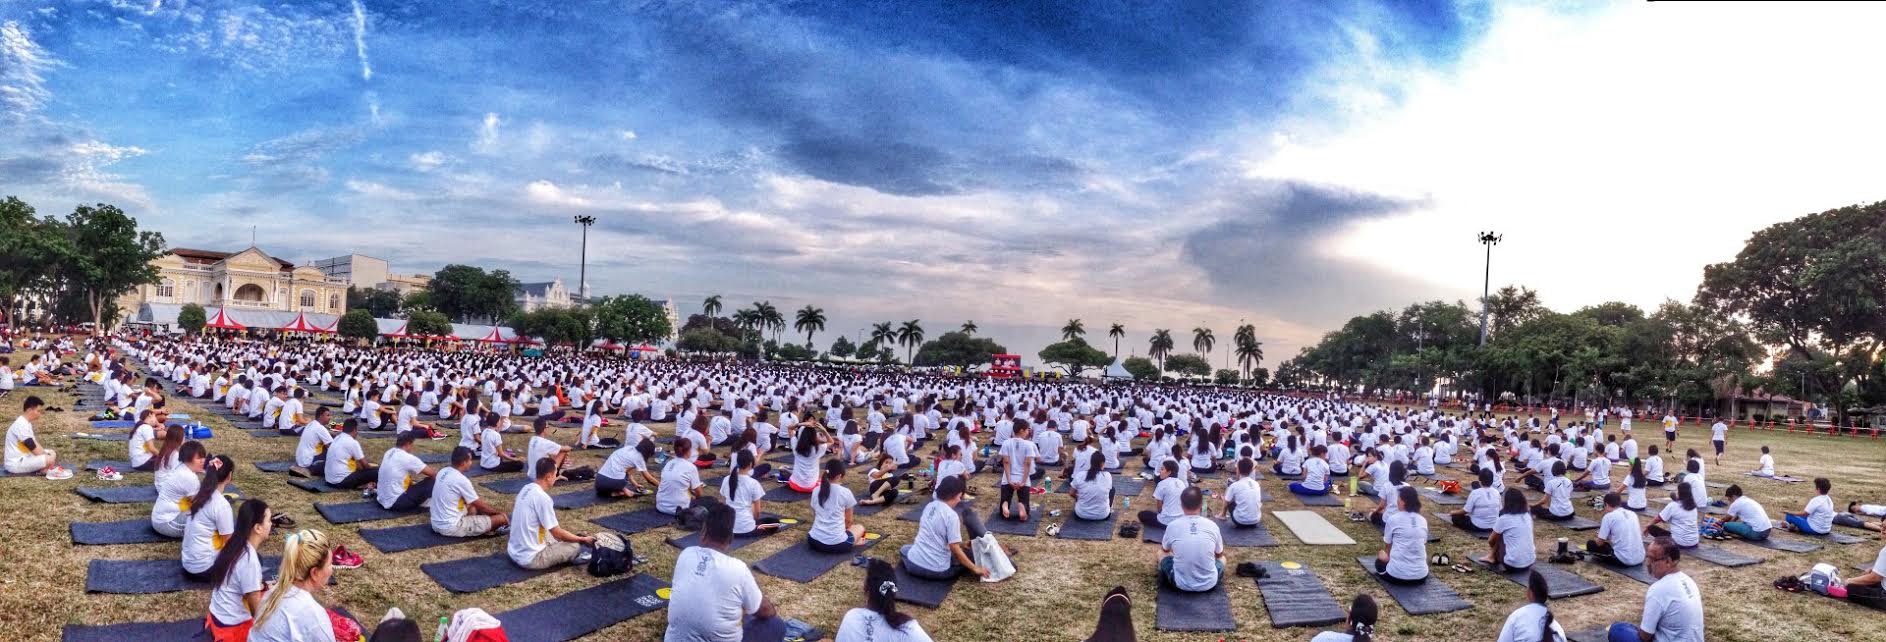 Guinness Book team in Surat to verify the world record of 1.25 lakh people performing Yoga